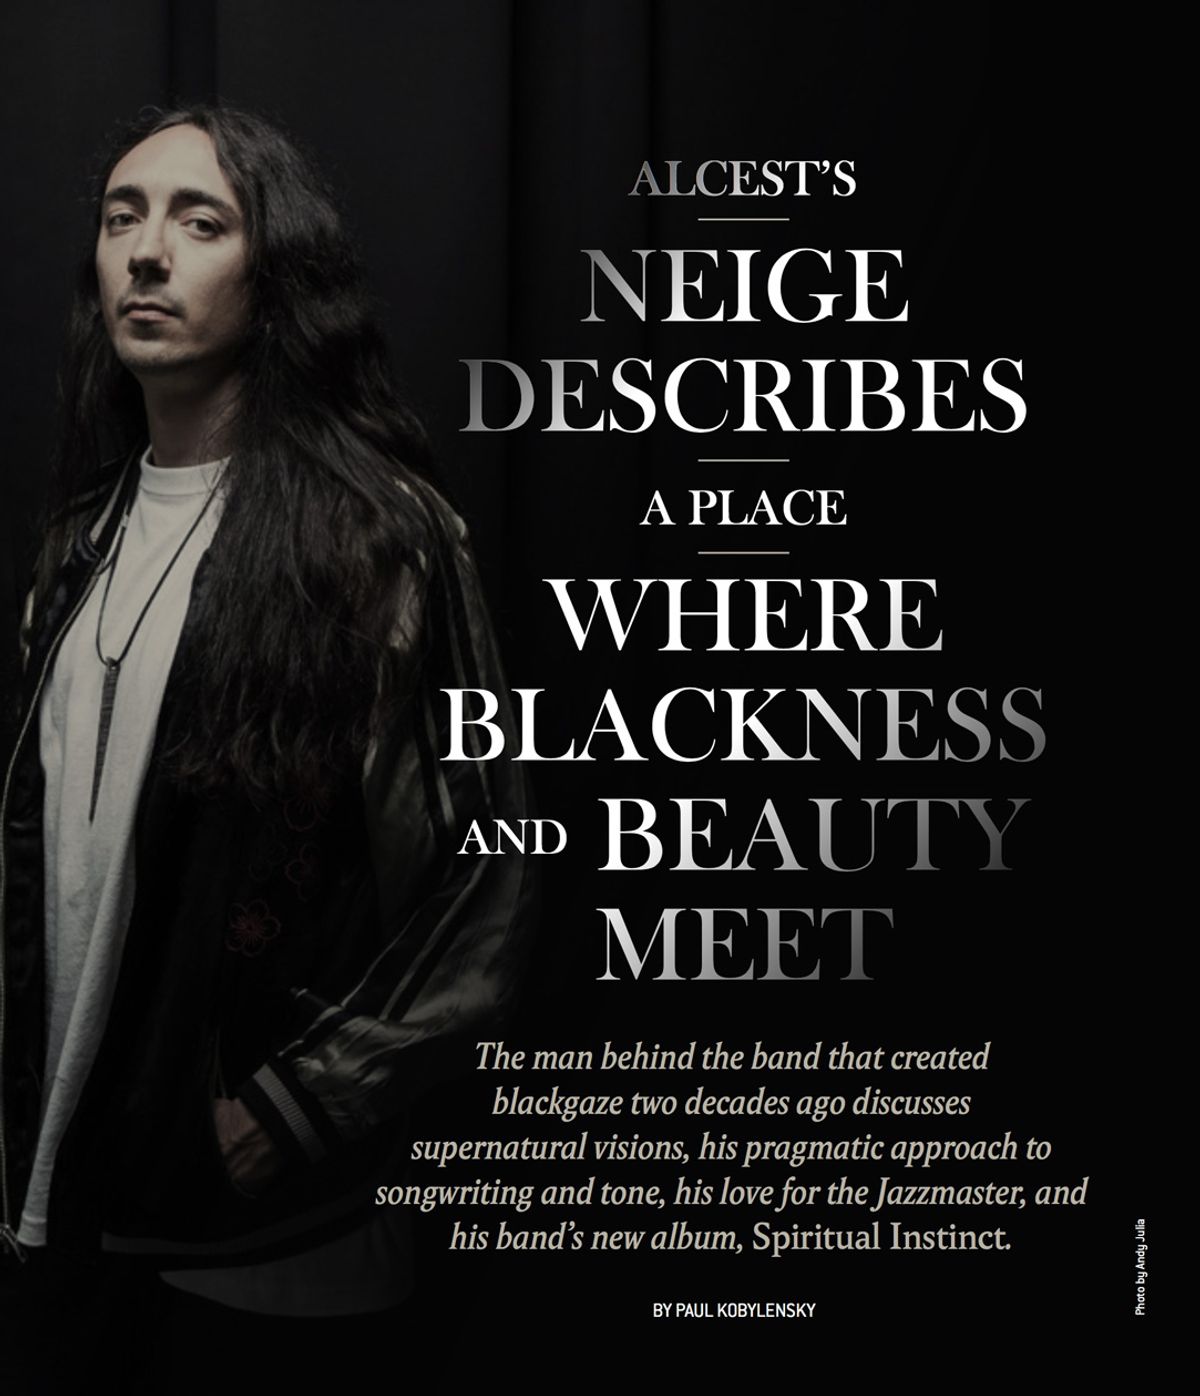 Alcest’s Neige Describes a Place Where Blackness and Beauty Meet